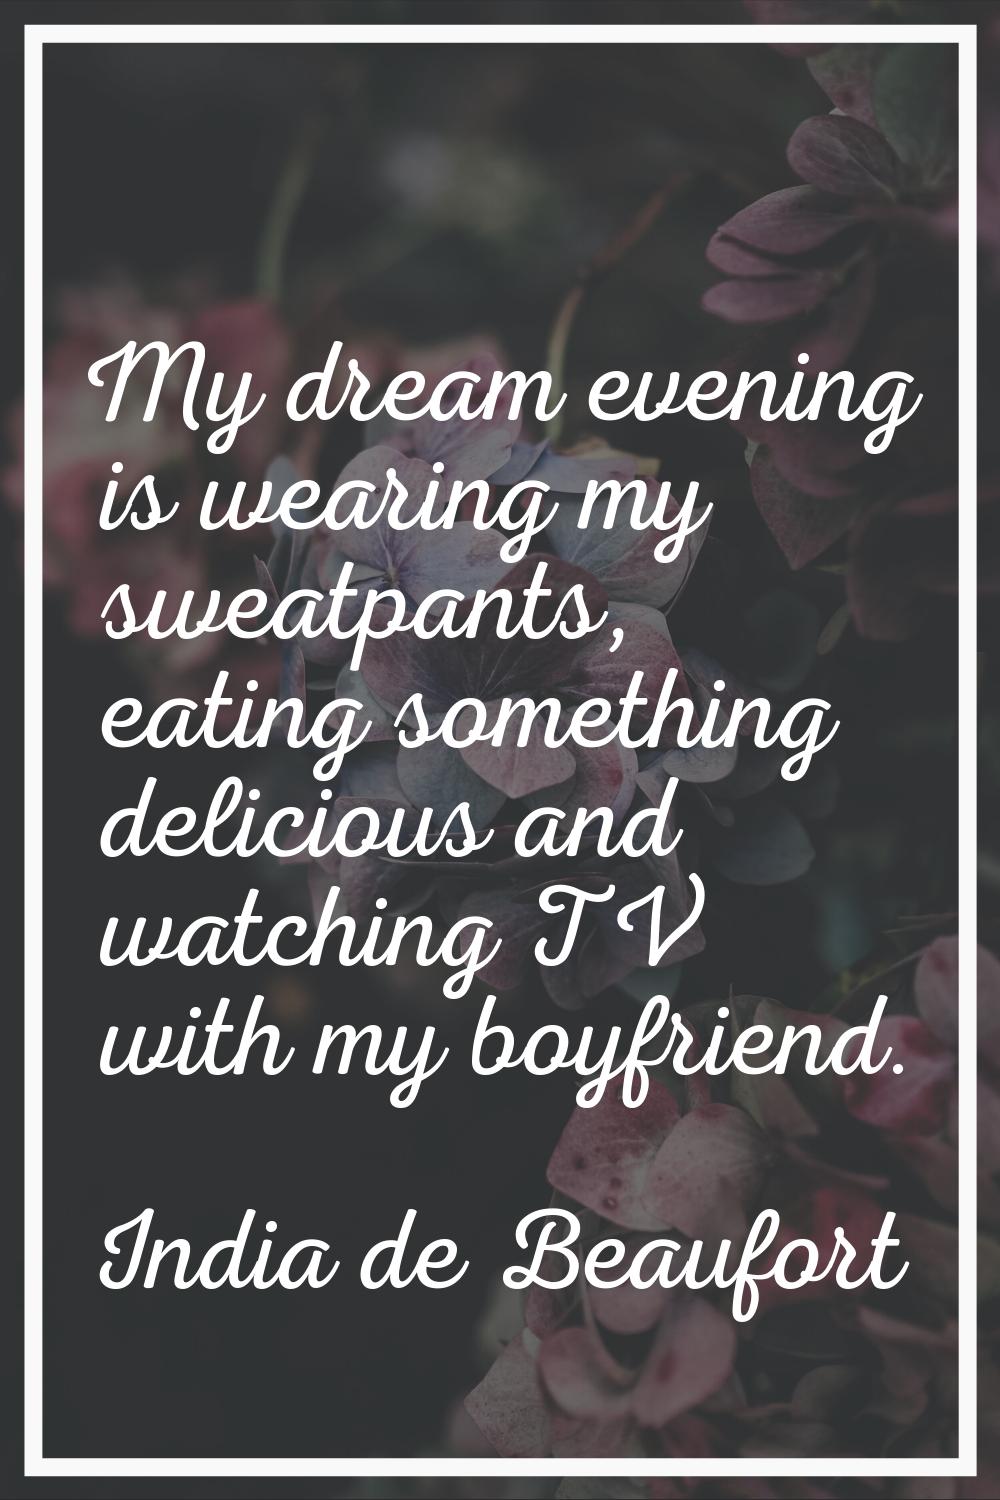 My dream evening is wearing my sweatpants, eating something delicious and watching TV with my boyfr